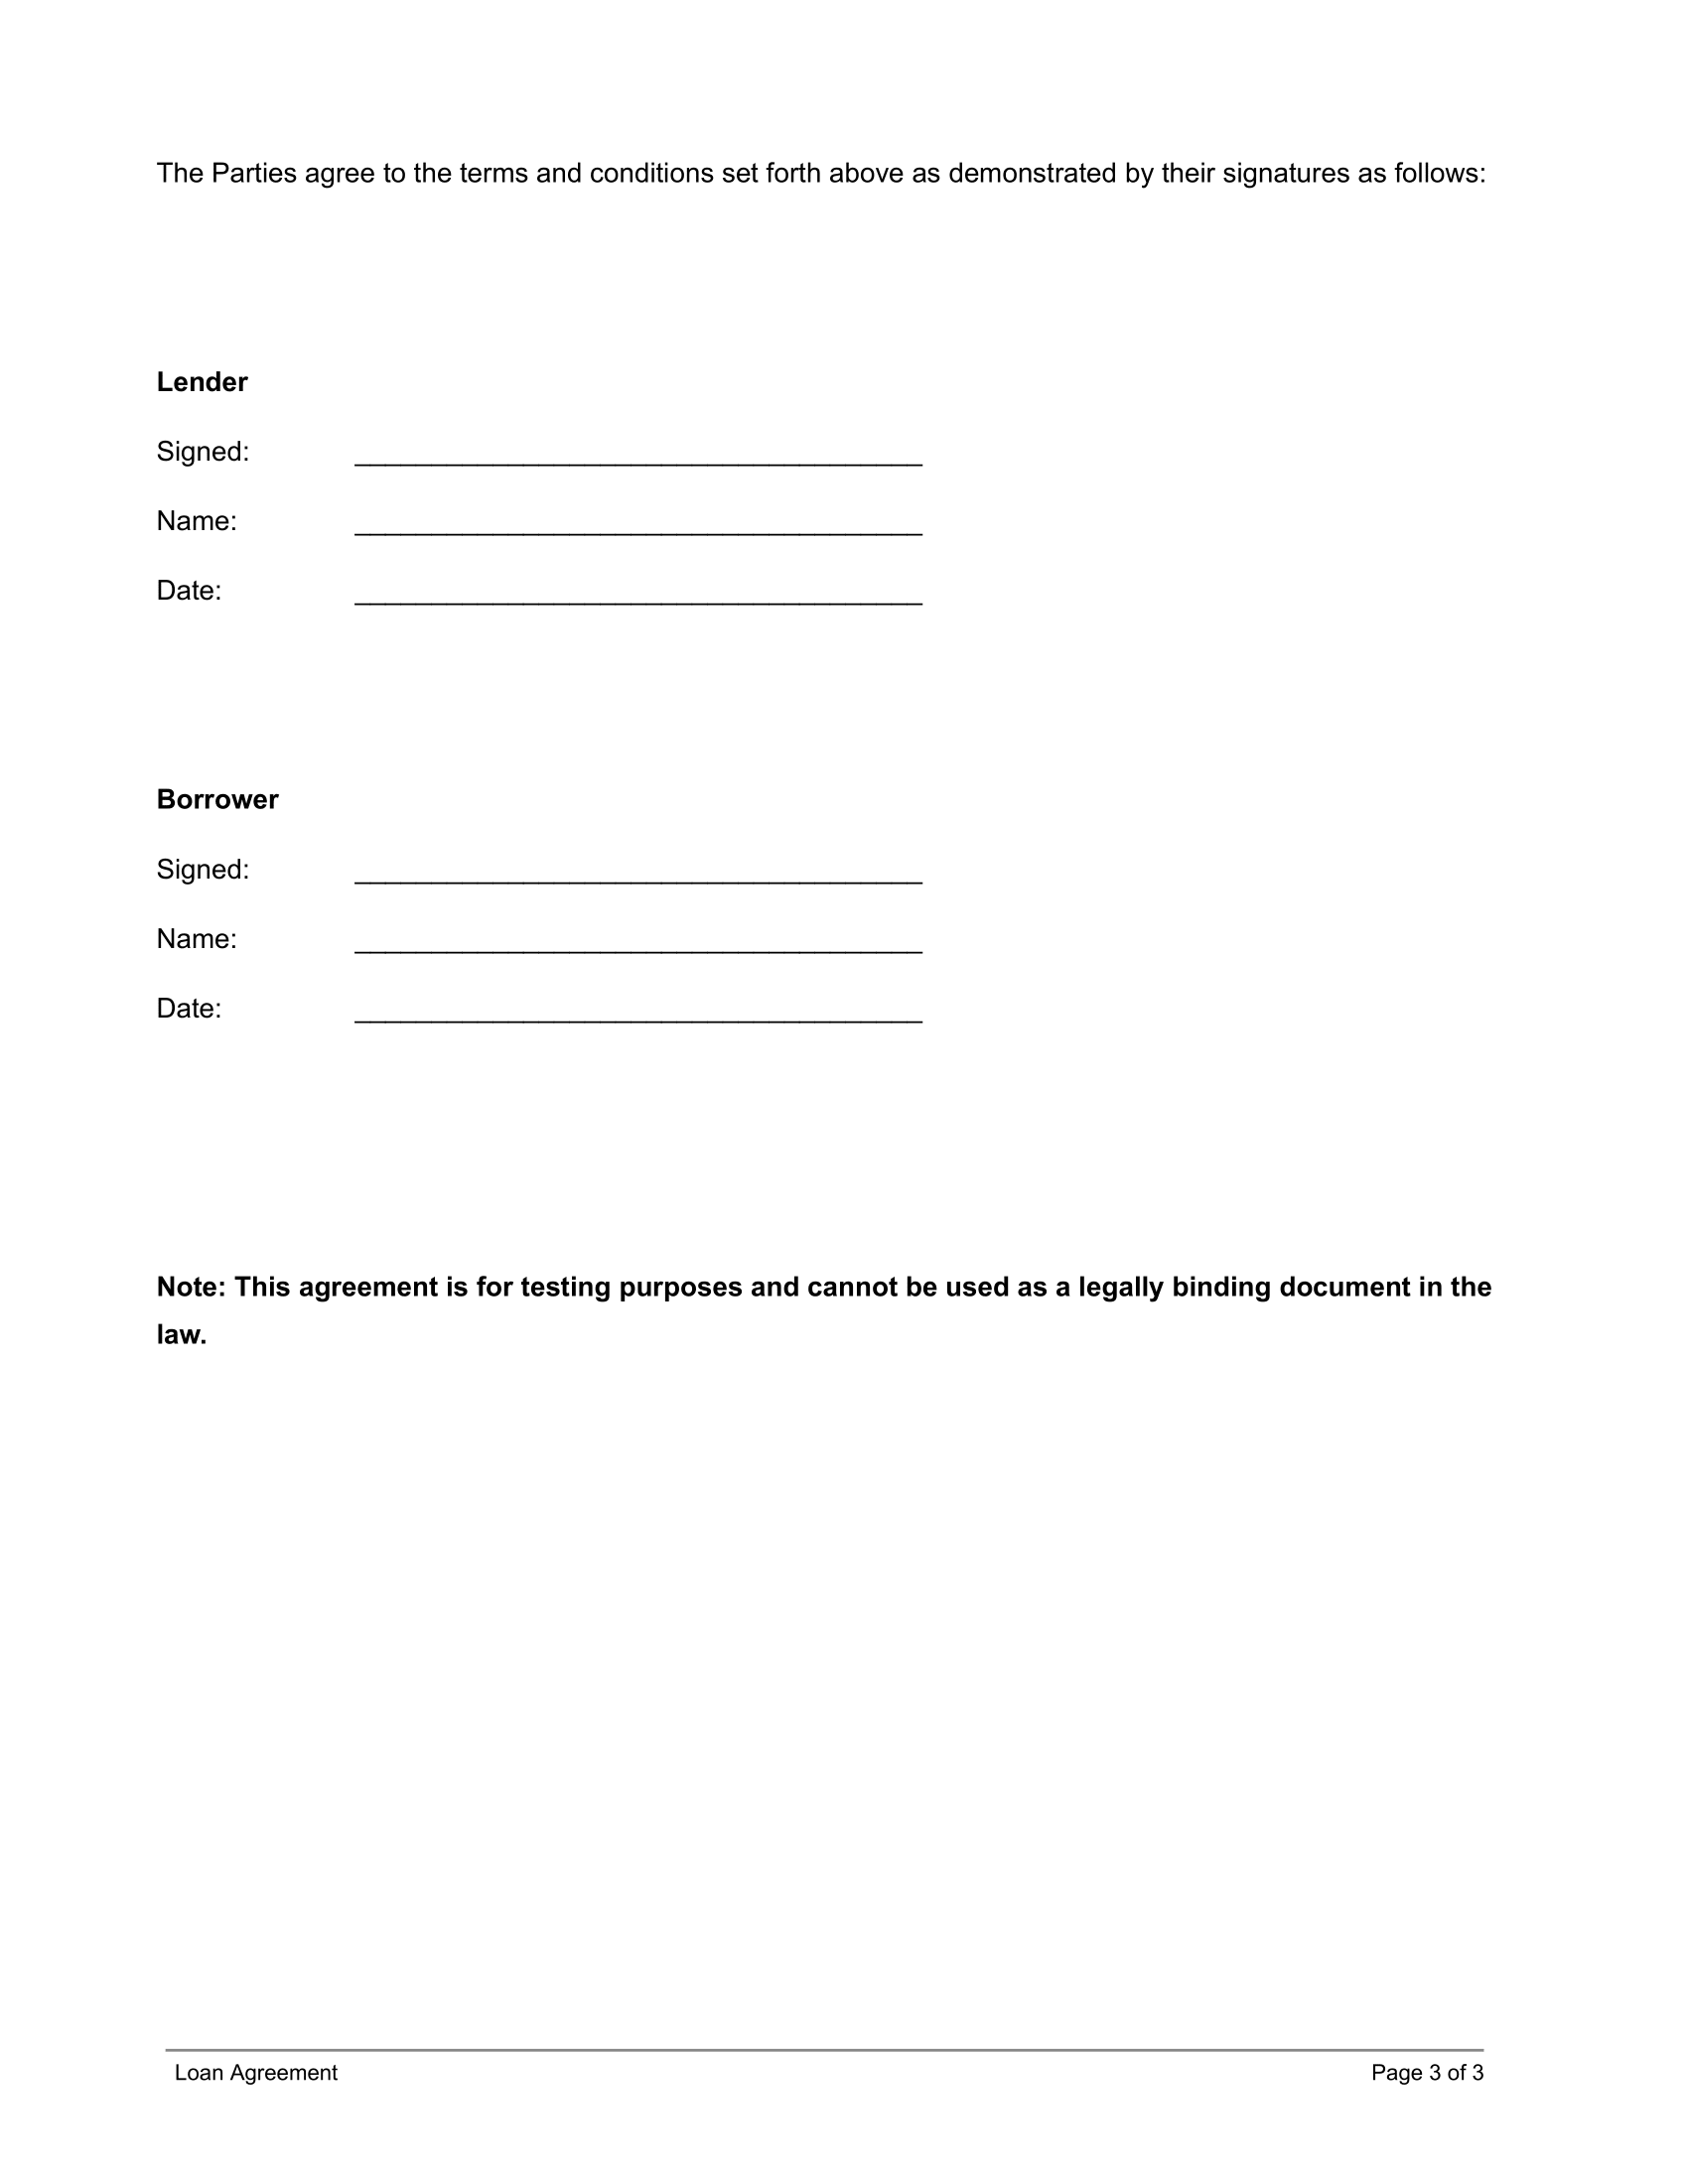 Loan Aggrement page 3